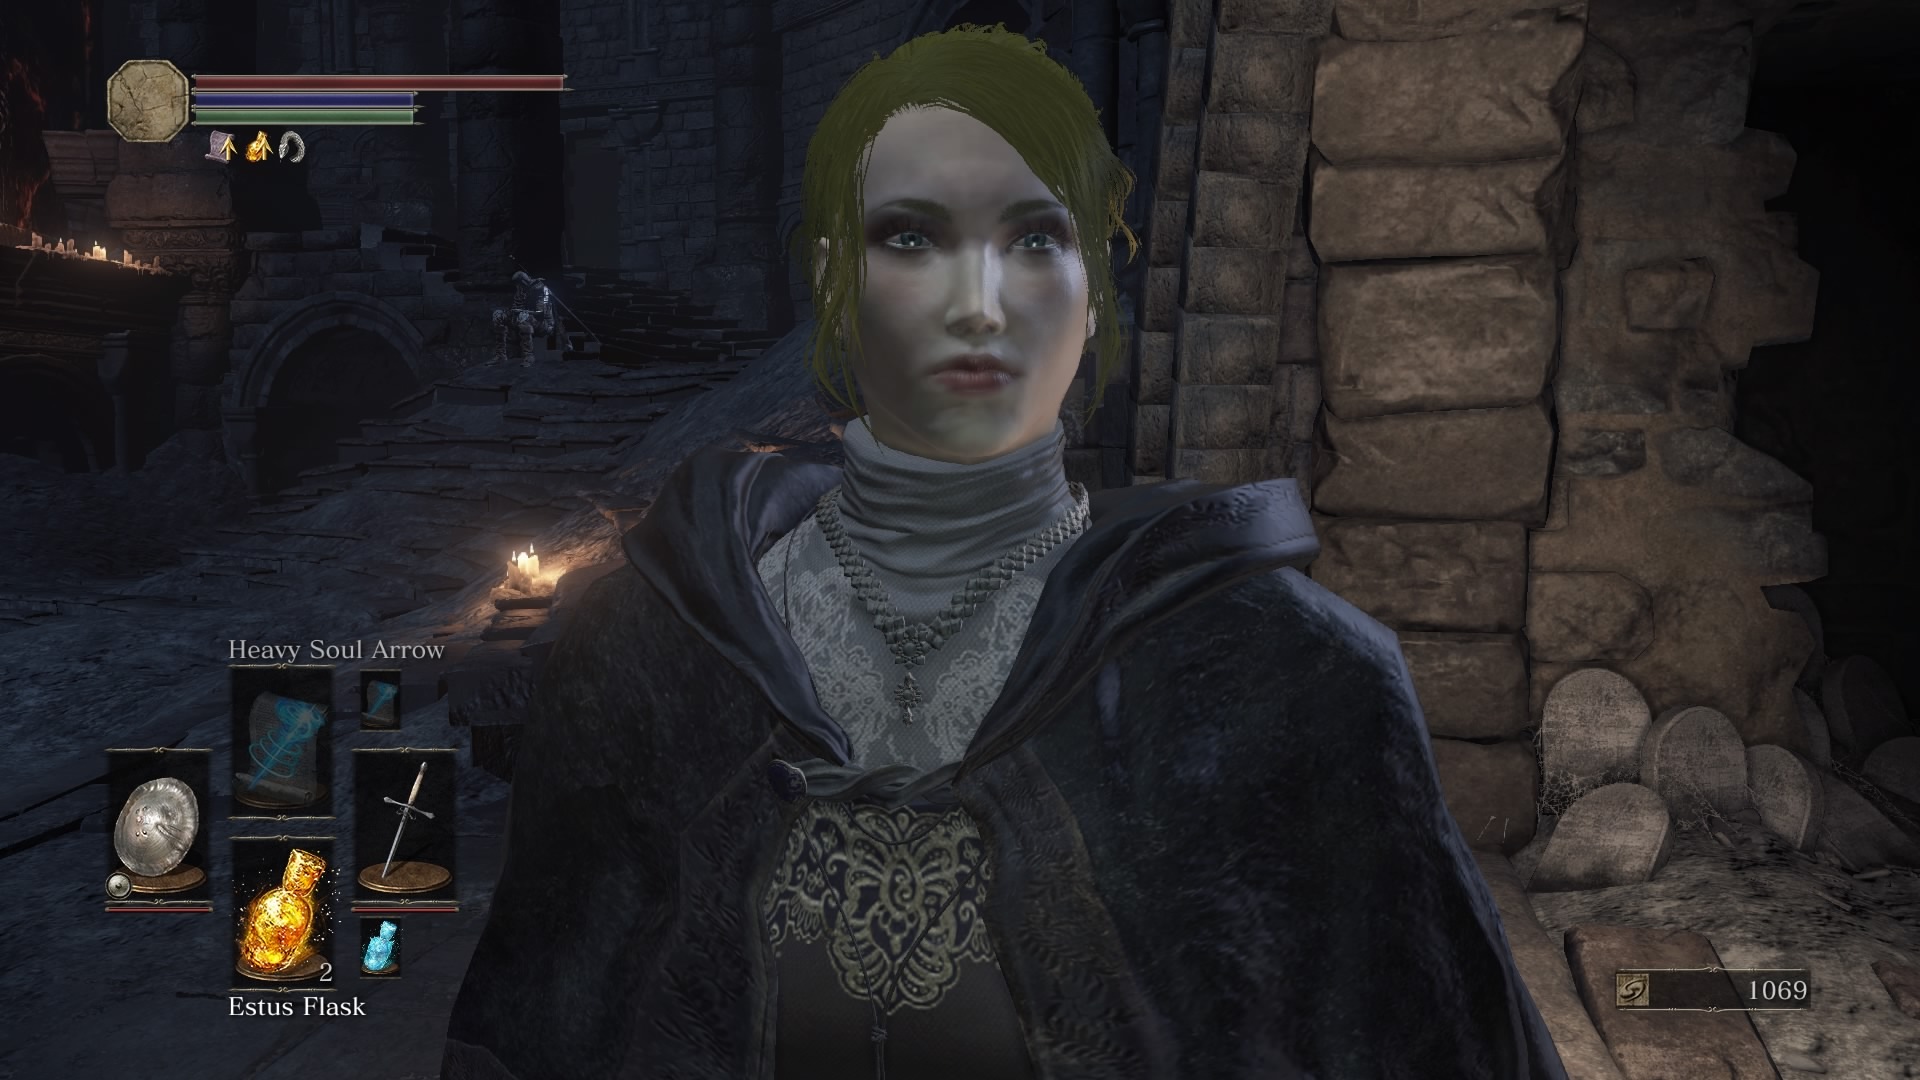 Man Female Faces In Ds2 Vs Ds3 Darksouls3 Of Ds3 Character Creation. 